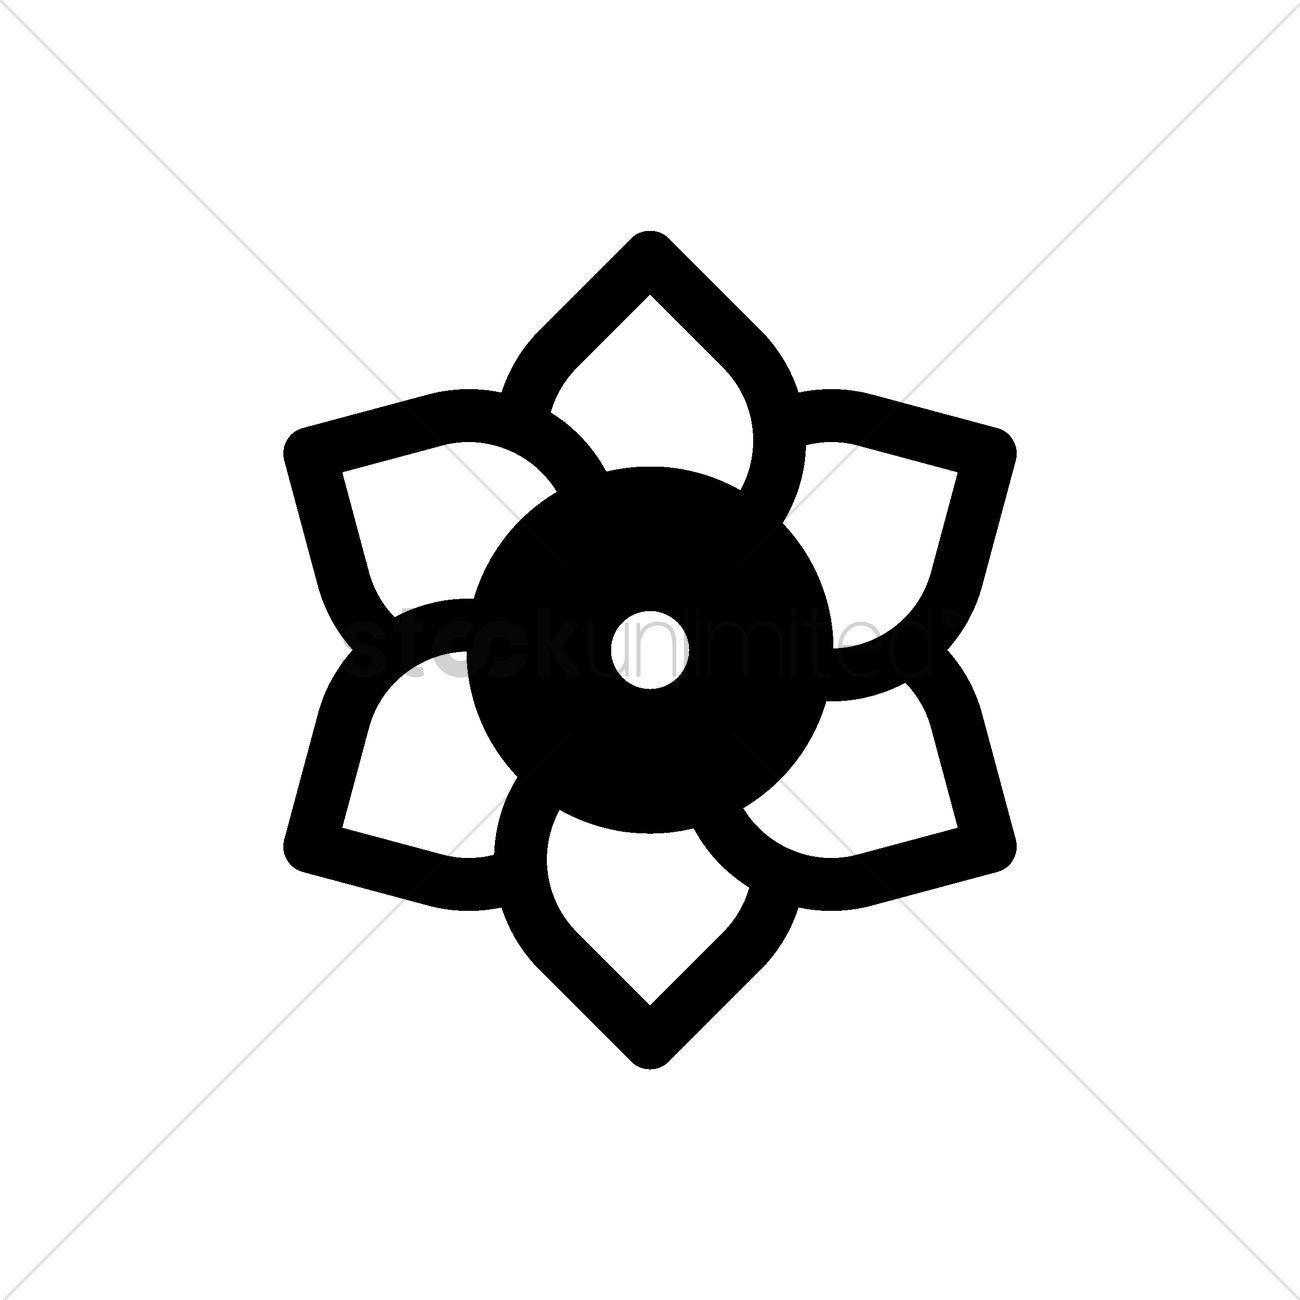 Chinese Flower Logo - Chinese lotus flower icon Vector Image